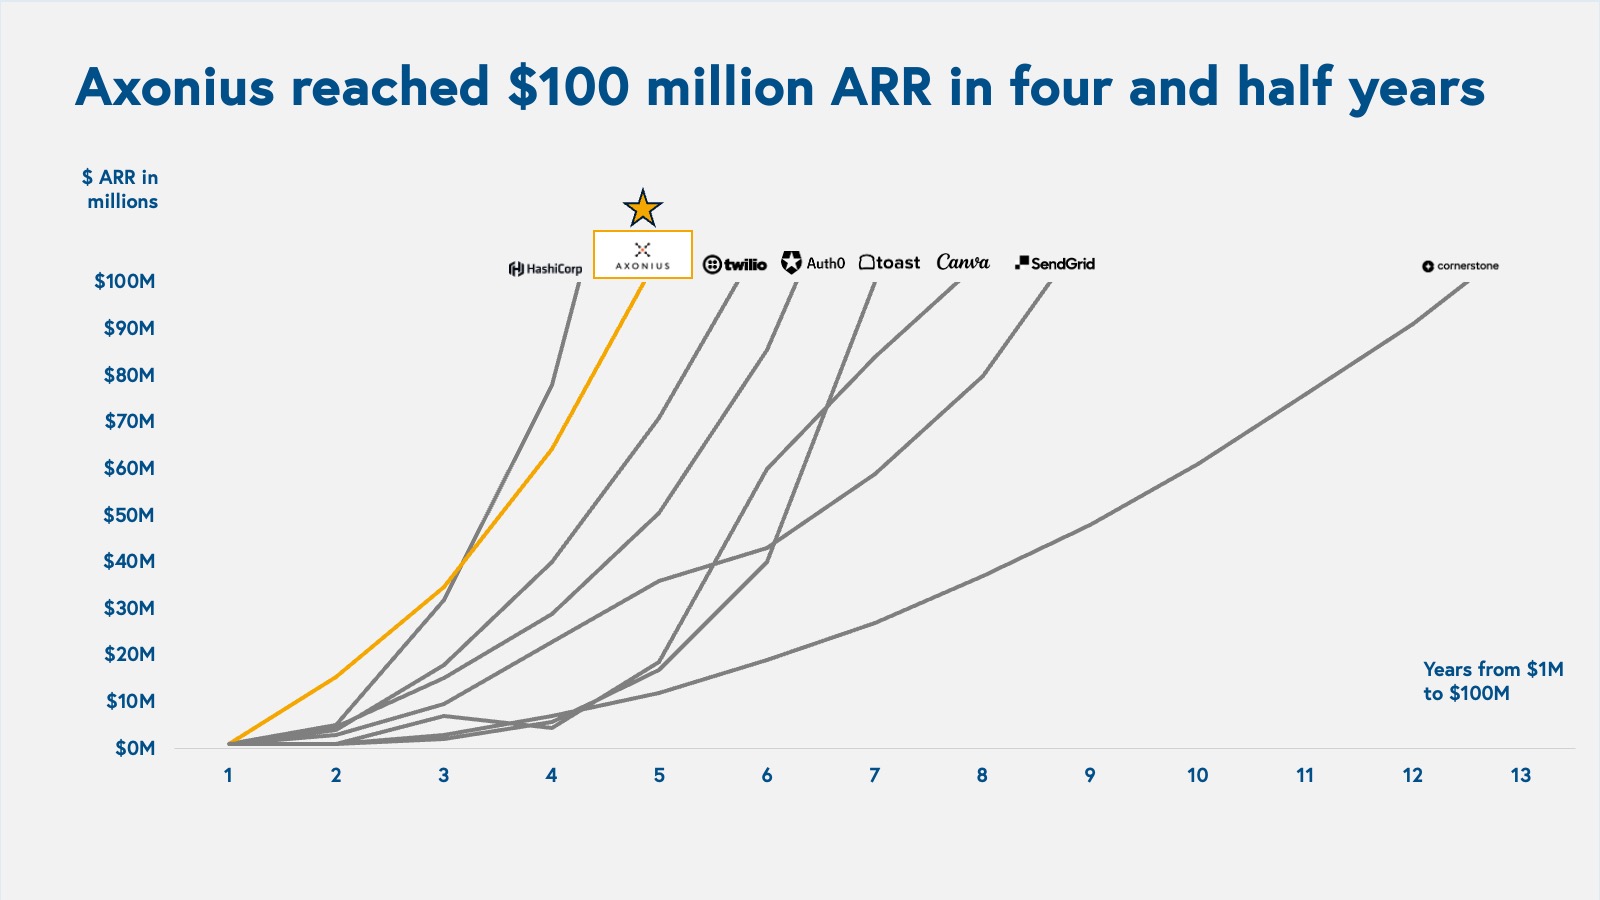 Axonius reached $100 million ARR in four and half years